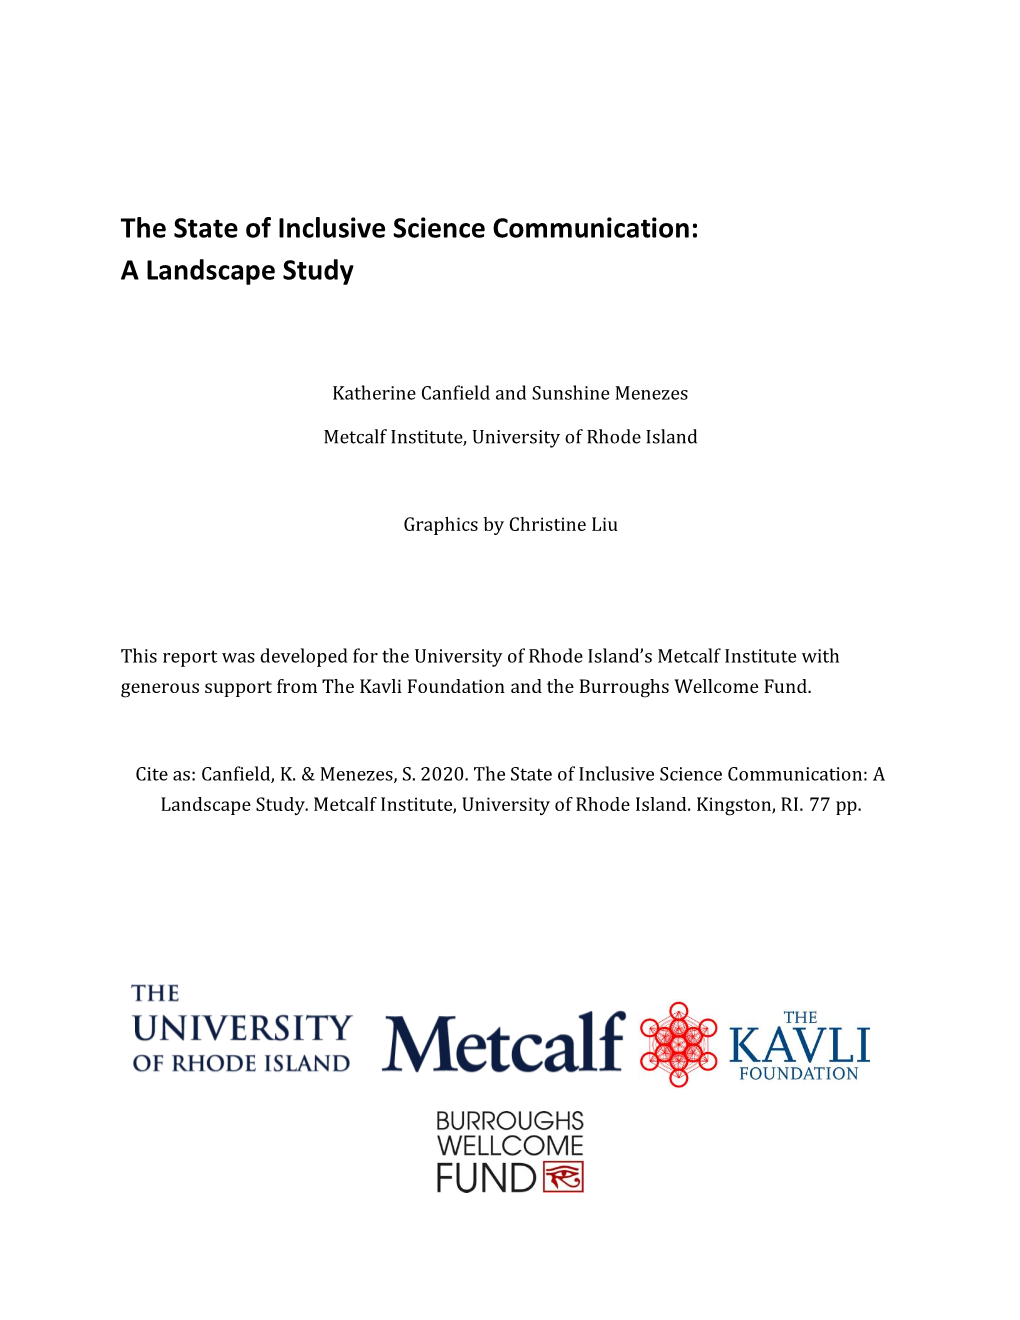 The State of Inclusive Science Communication: a Landscape Study